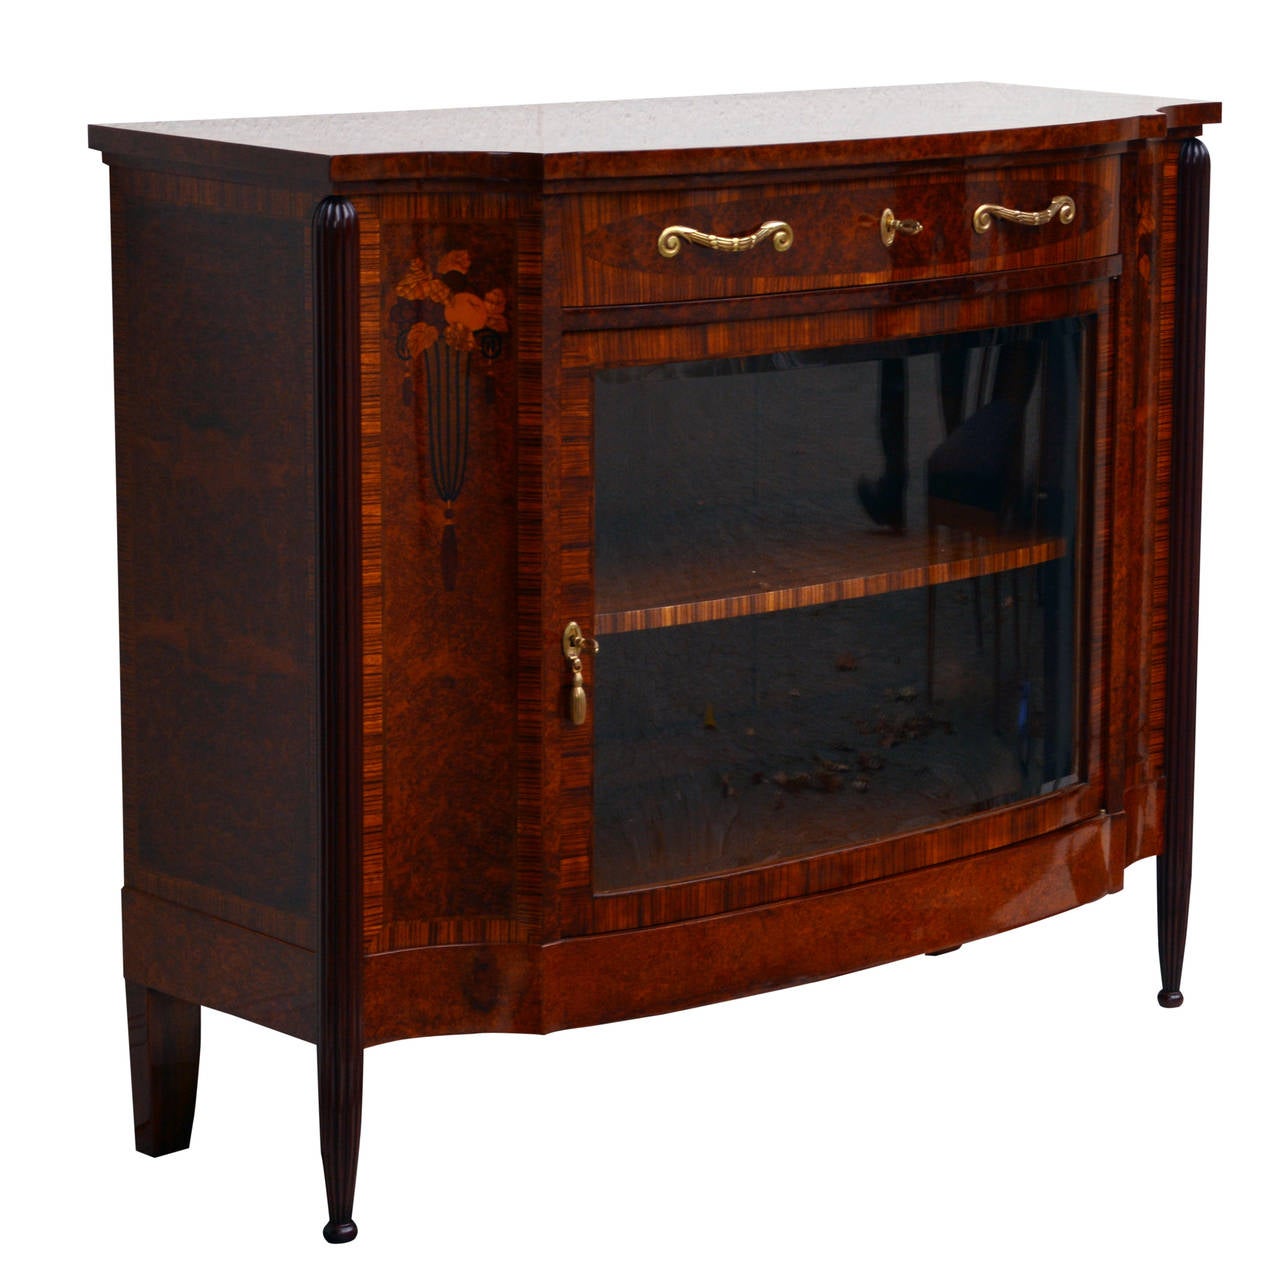 Exceptional Art Déco Period Sideboard, Paris, 1920s. Made of walnut, rosewood, and other precious wood. 

Concave sides, very detailed intricate marquetry, glass door with cut glass.

This sideboard is attributed to French master designer Paul